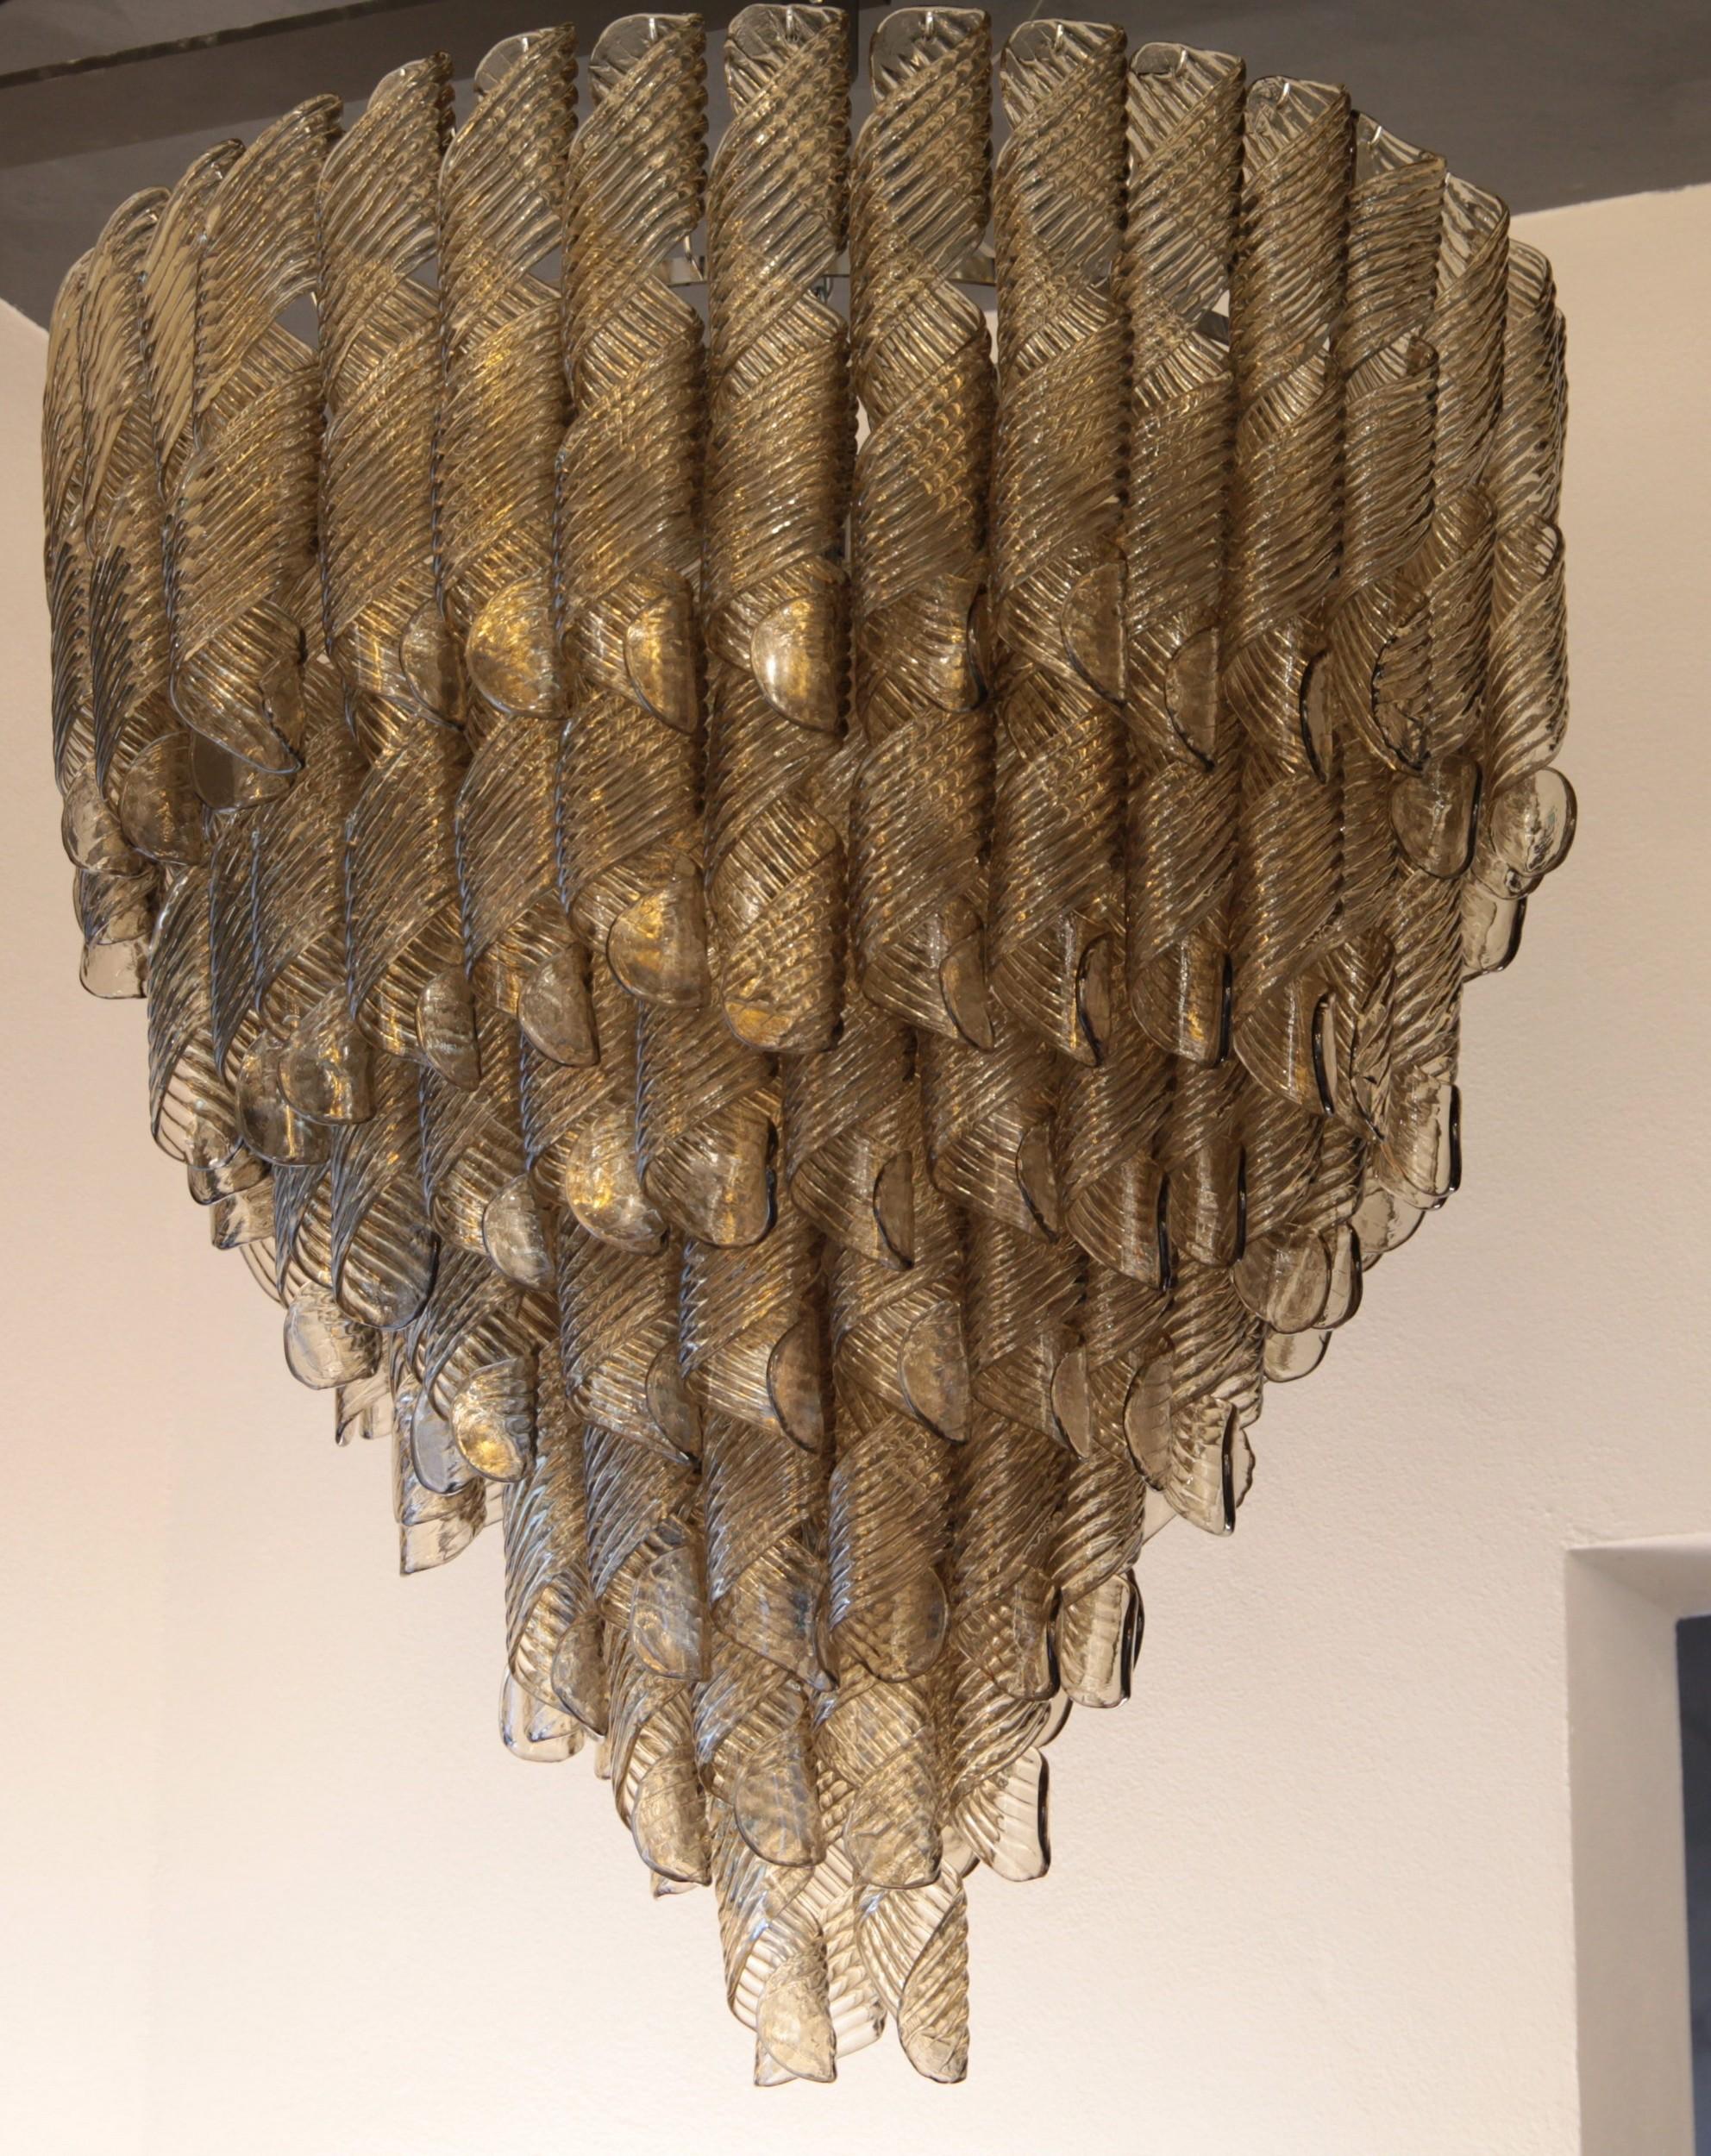 Monumental Chandelier, Murano Fume Glass in Spiral Ribbed Elements, 7 Tiers 11